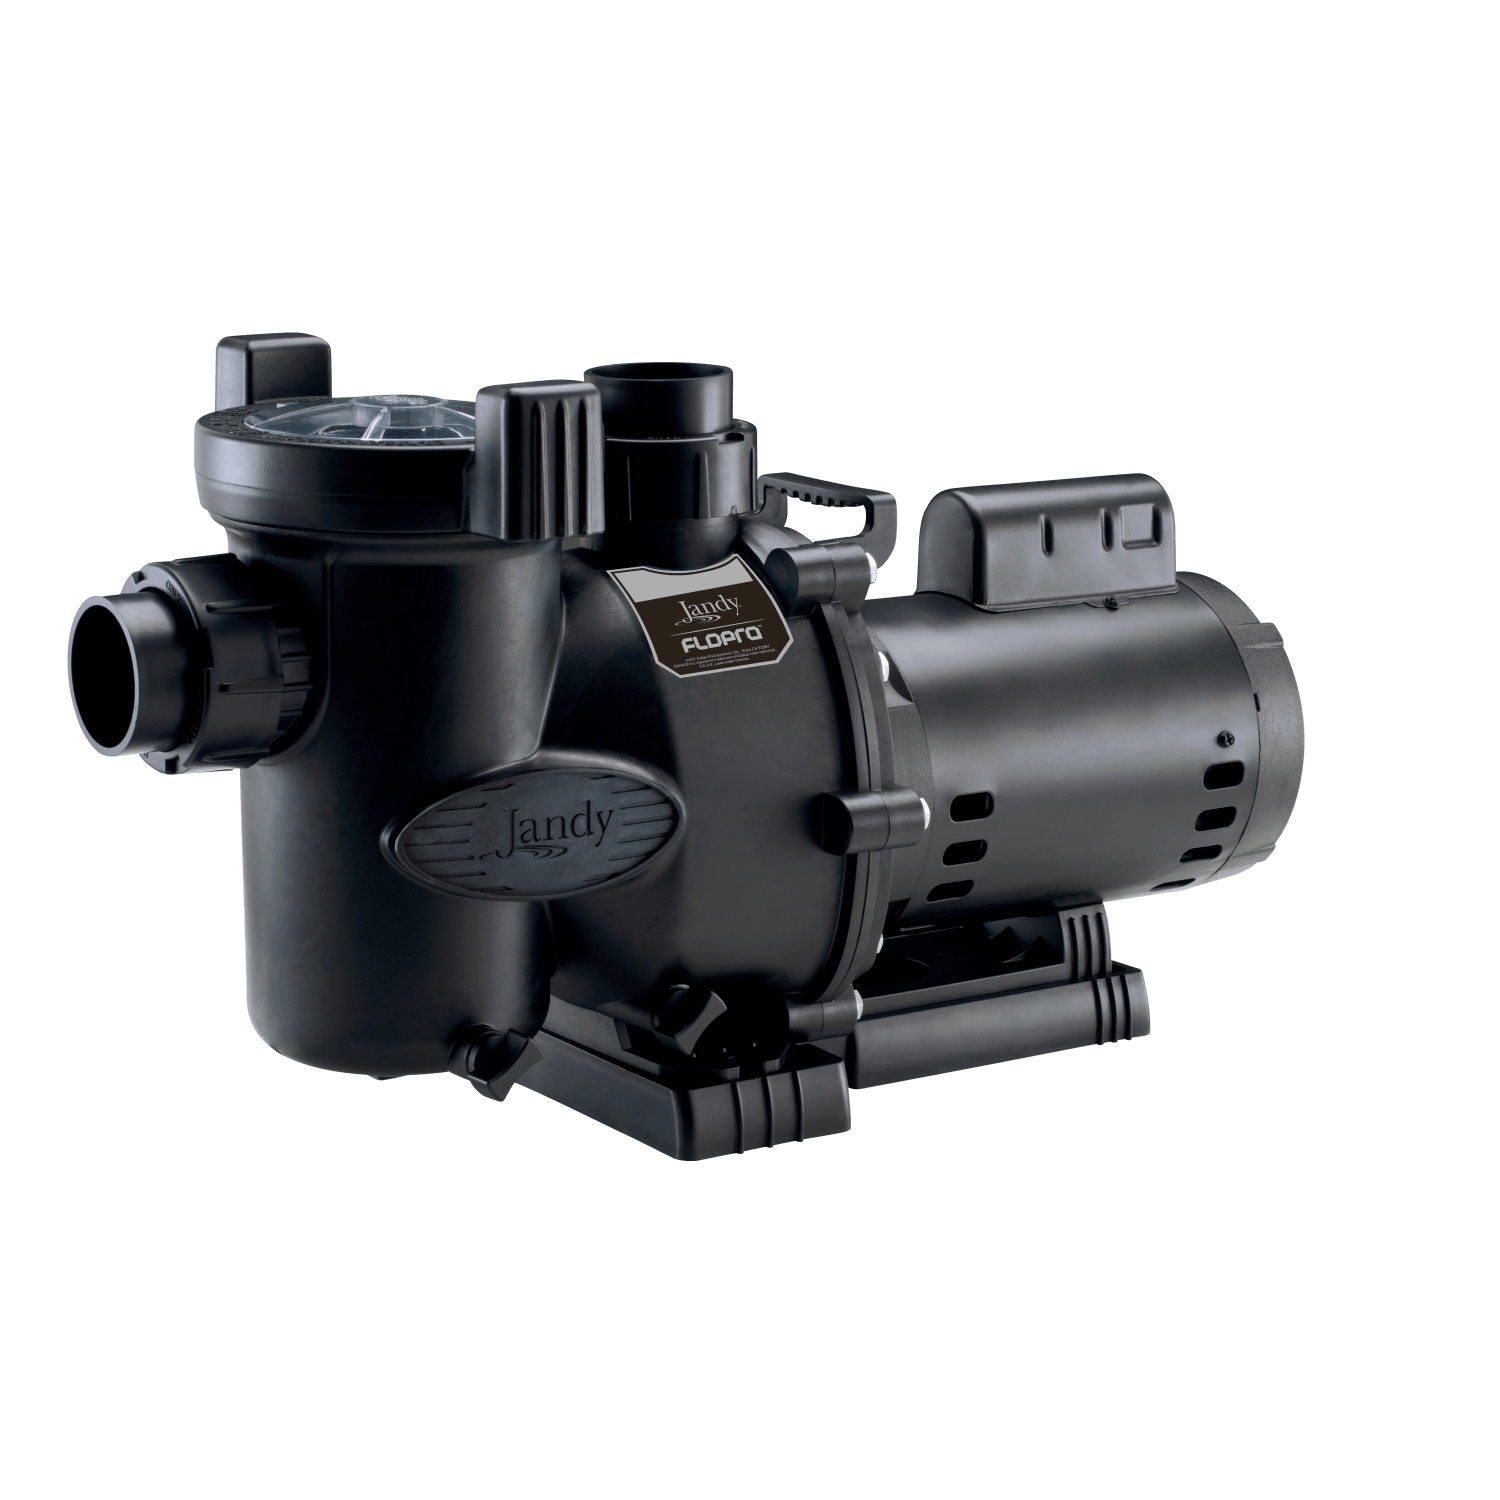 Jandy FloPro In-Ground Pool Pump